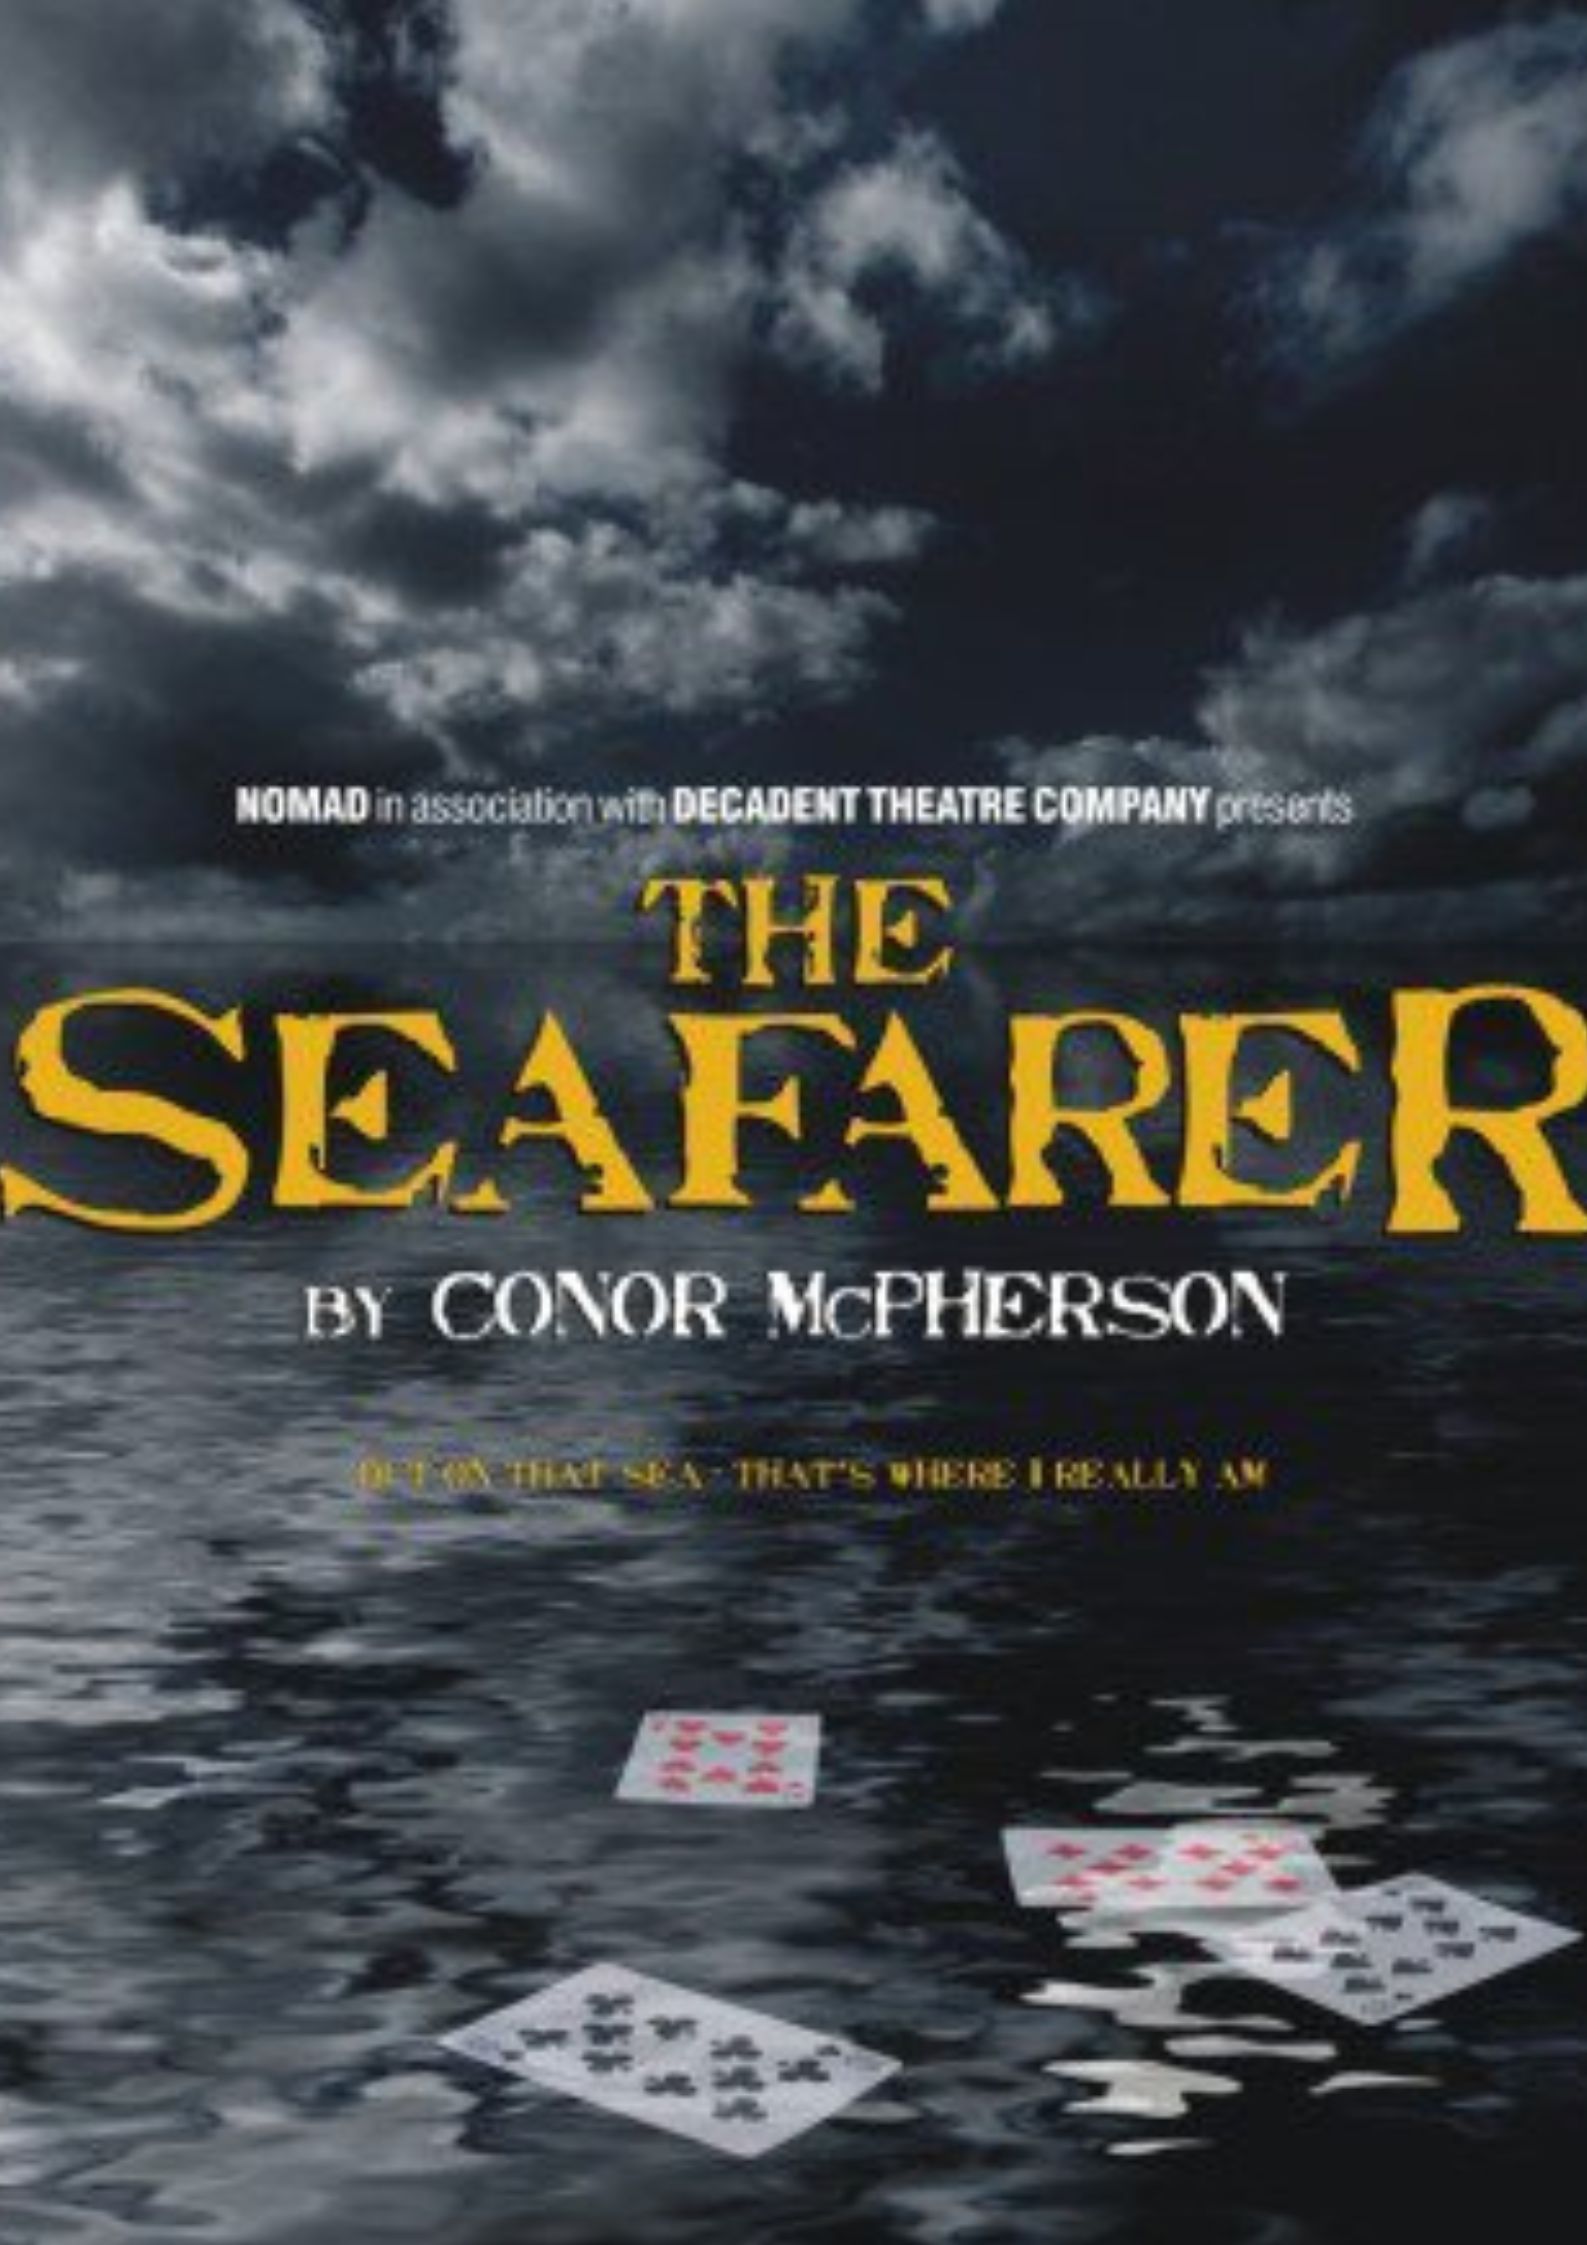 The Seafarer poster